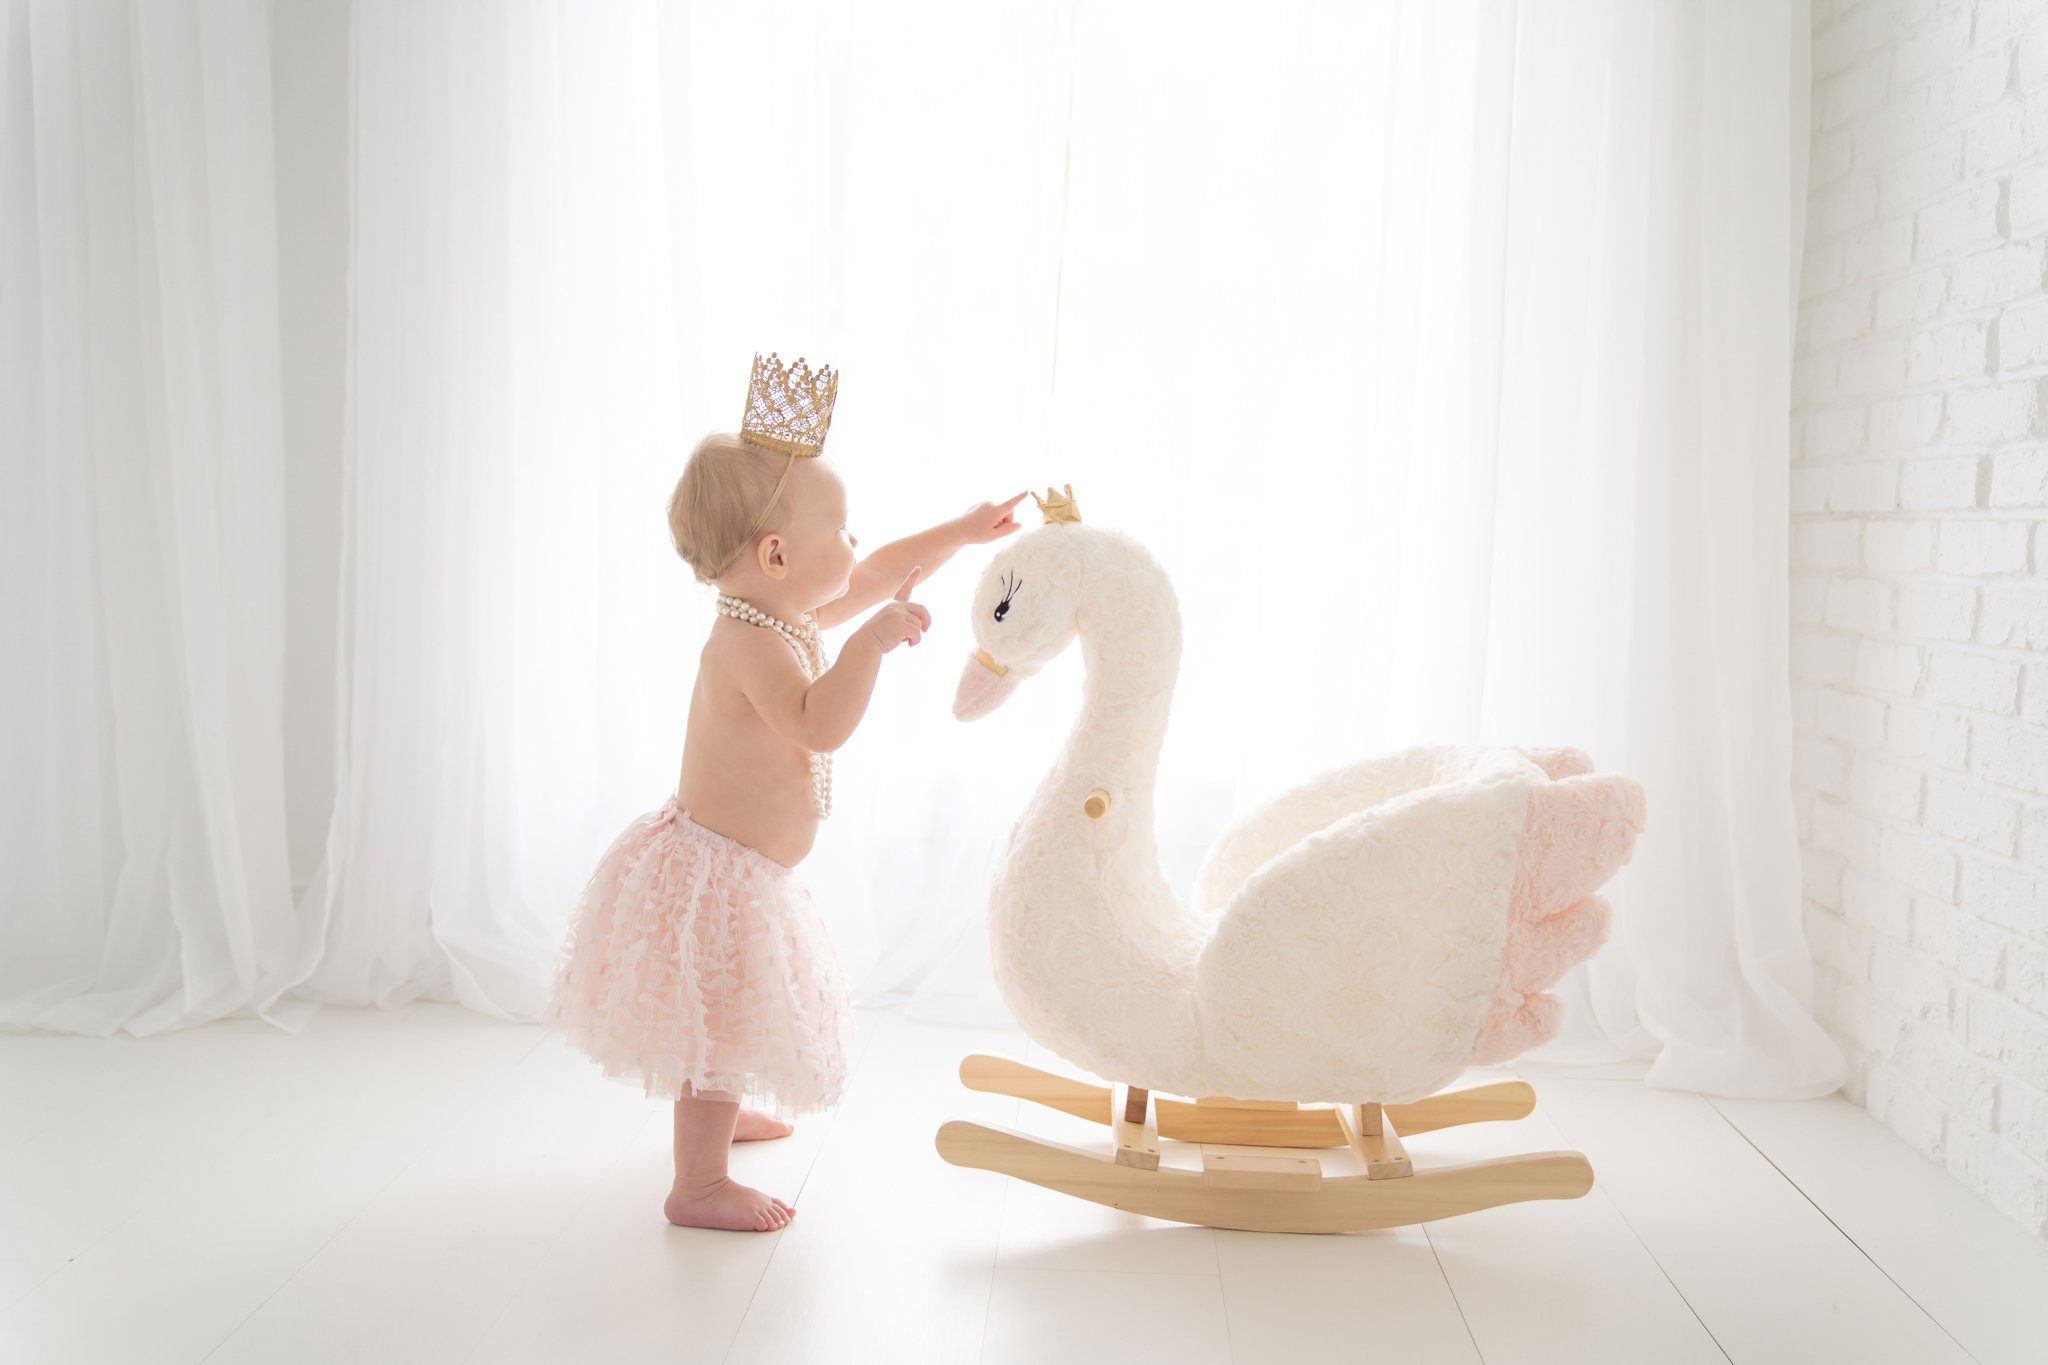 One Year old being photographed in a Jupiter Florida photography studio wearing pink skirt and crown and standing by a rocking swan.